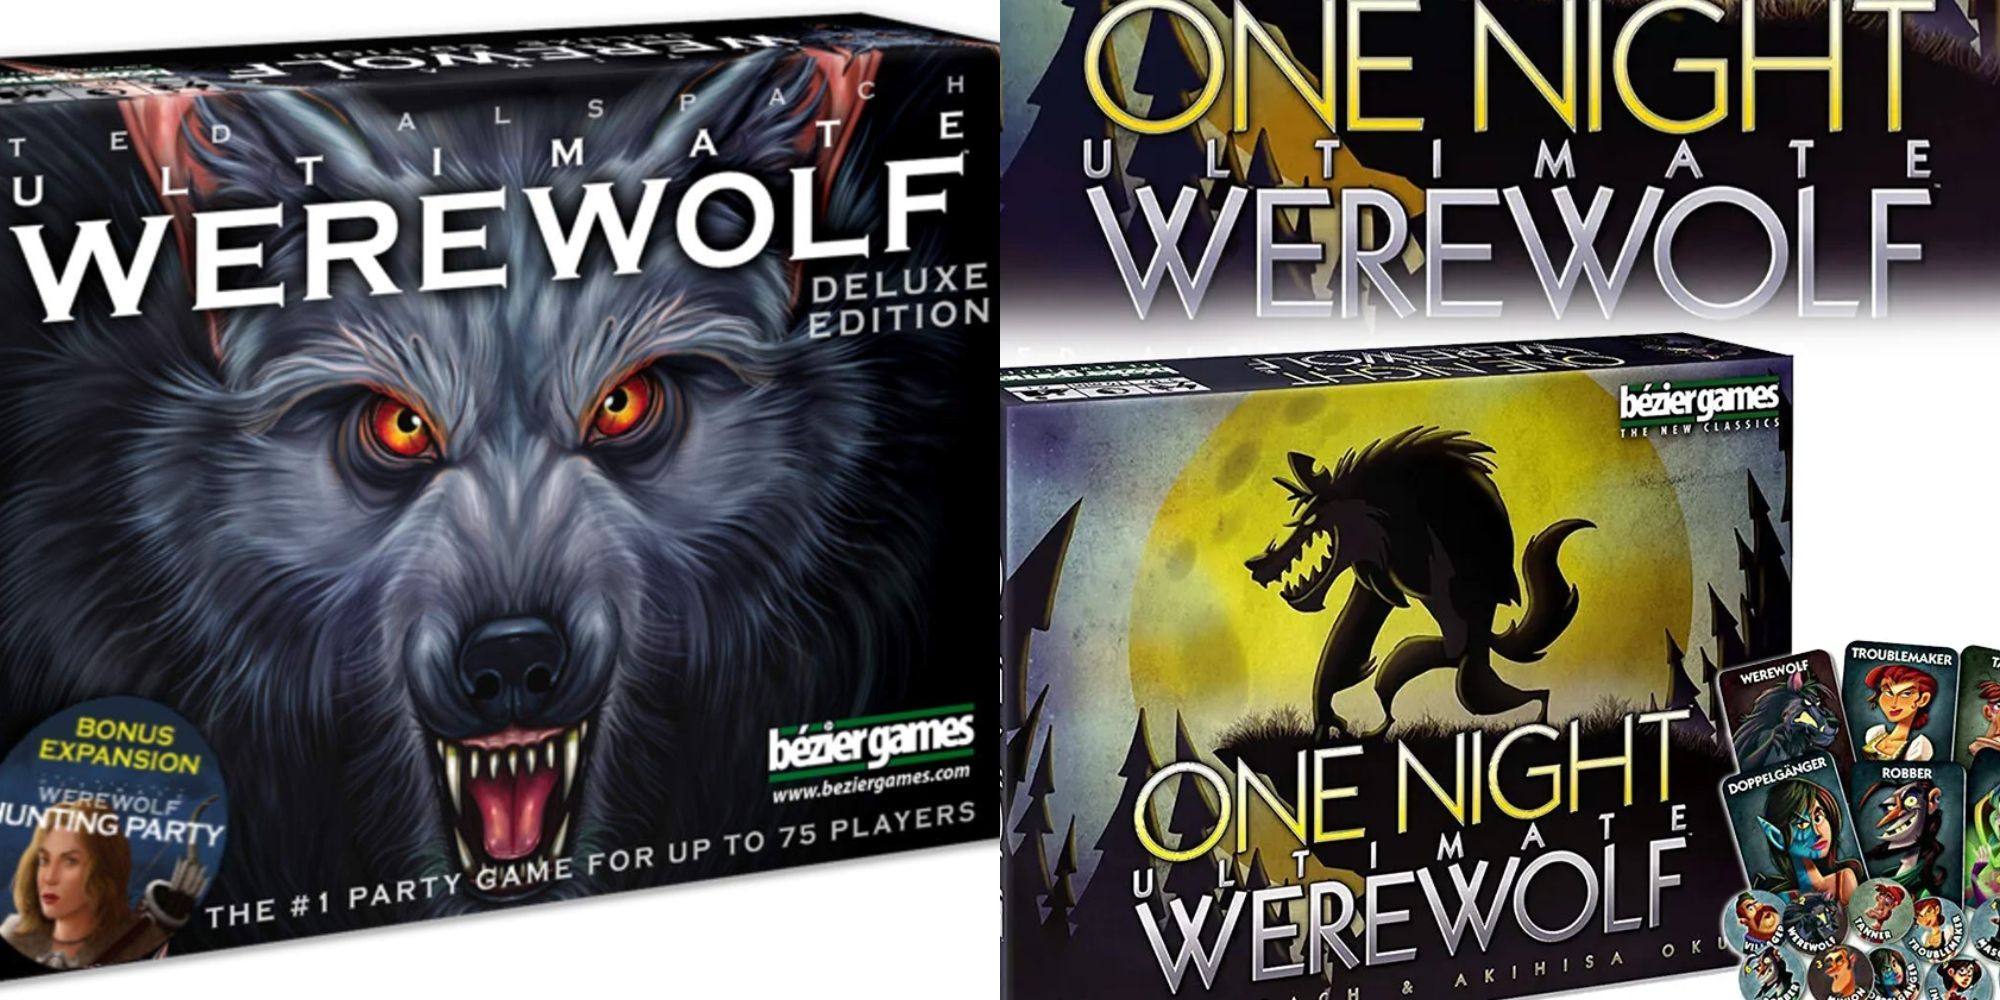 Ultimate Werewolf and One Night Ultimate Werewolf boxes